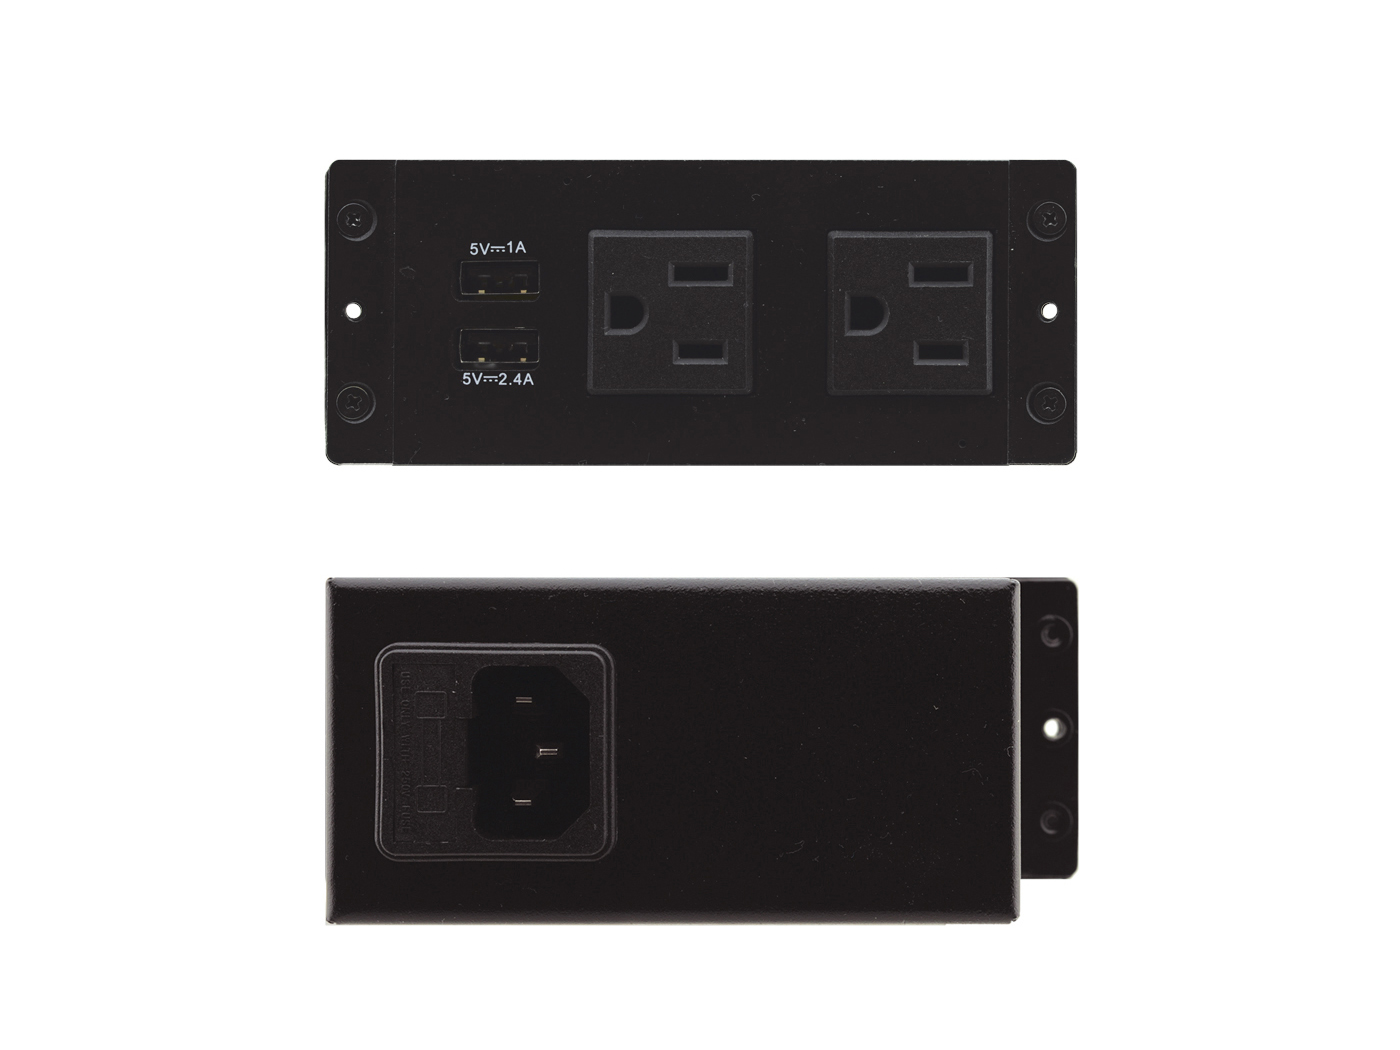 TS-2UC TBUS Dual socket module with 2 US AC power sockets and 2 USB charging ports by Kramer